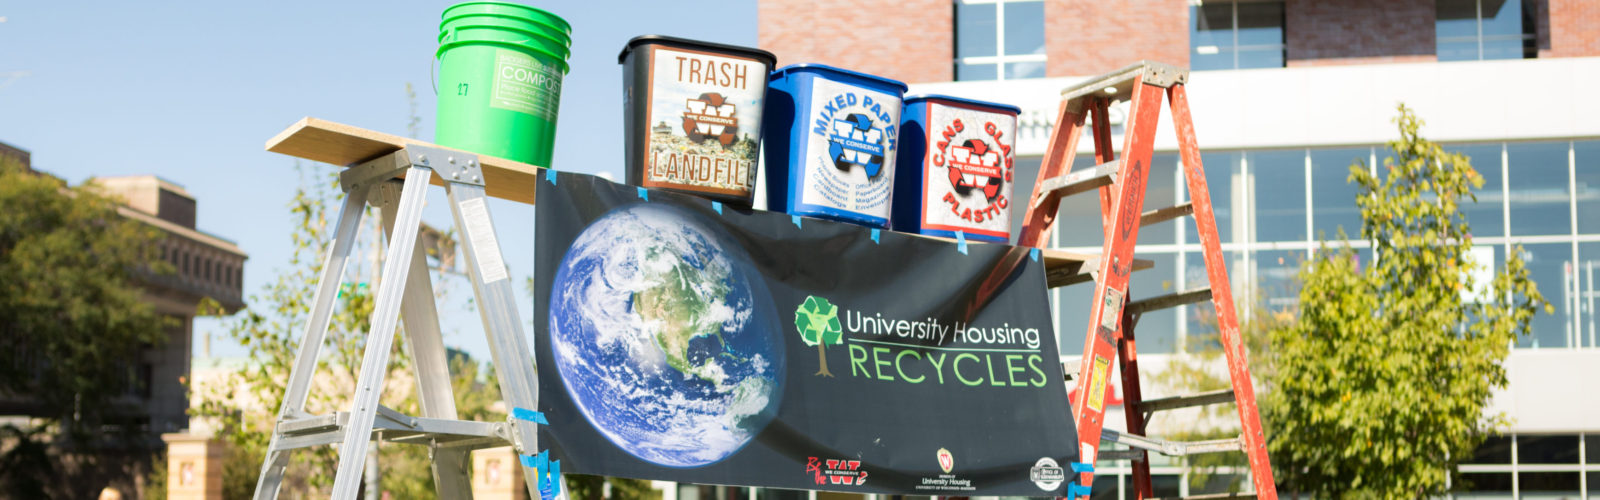 Display featuring different methods of waste reduction at sustain-a-bash 2017.